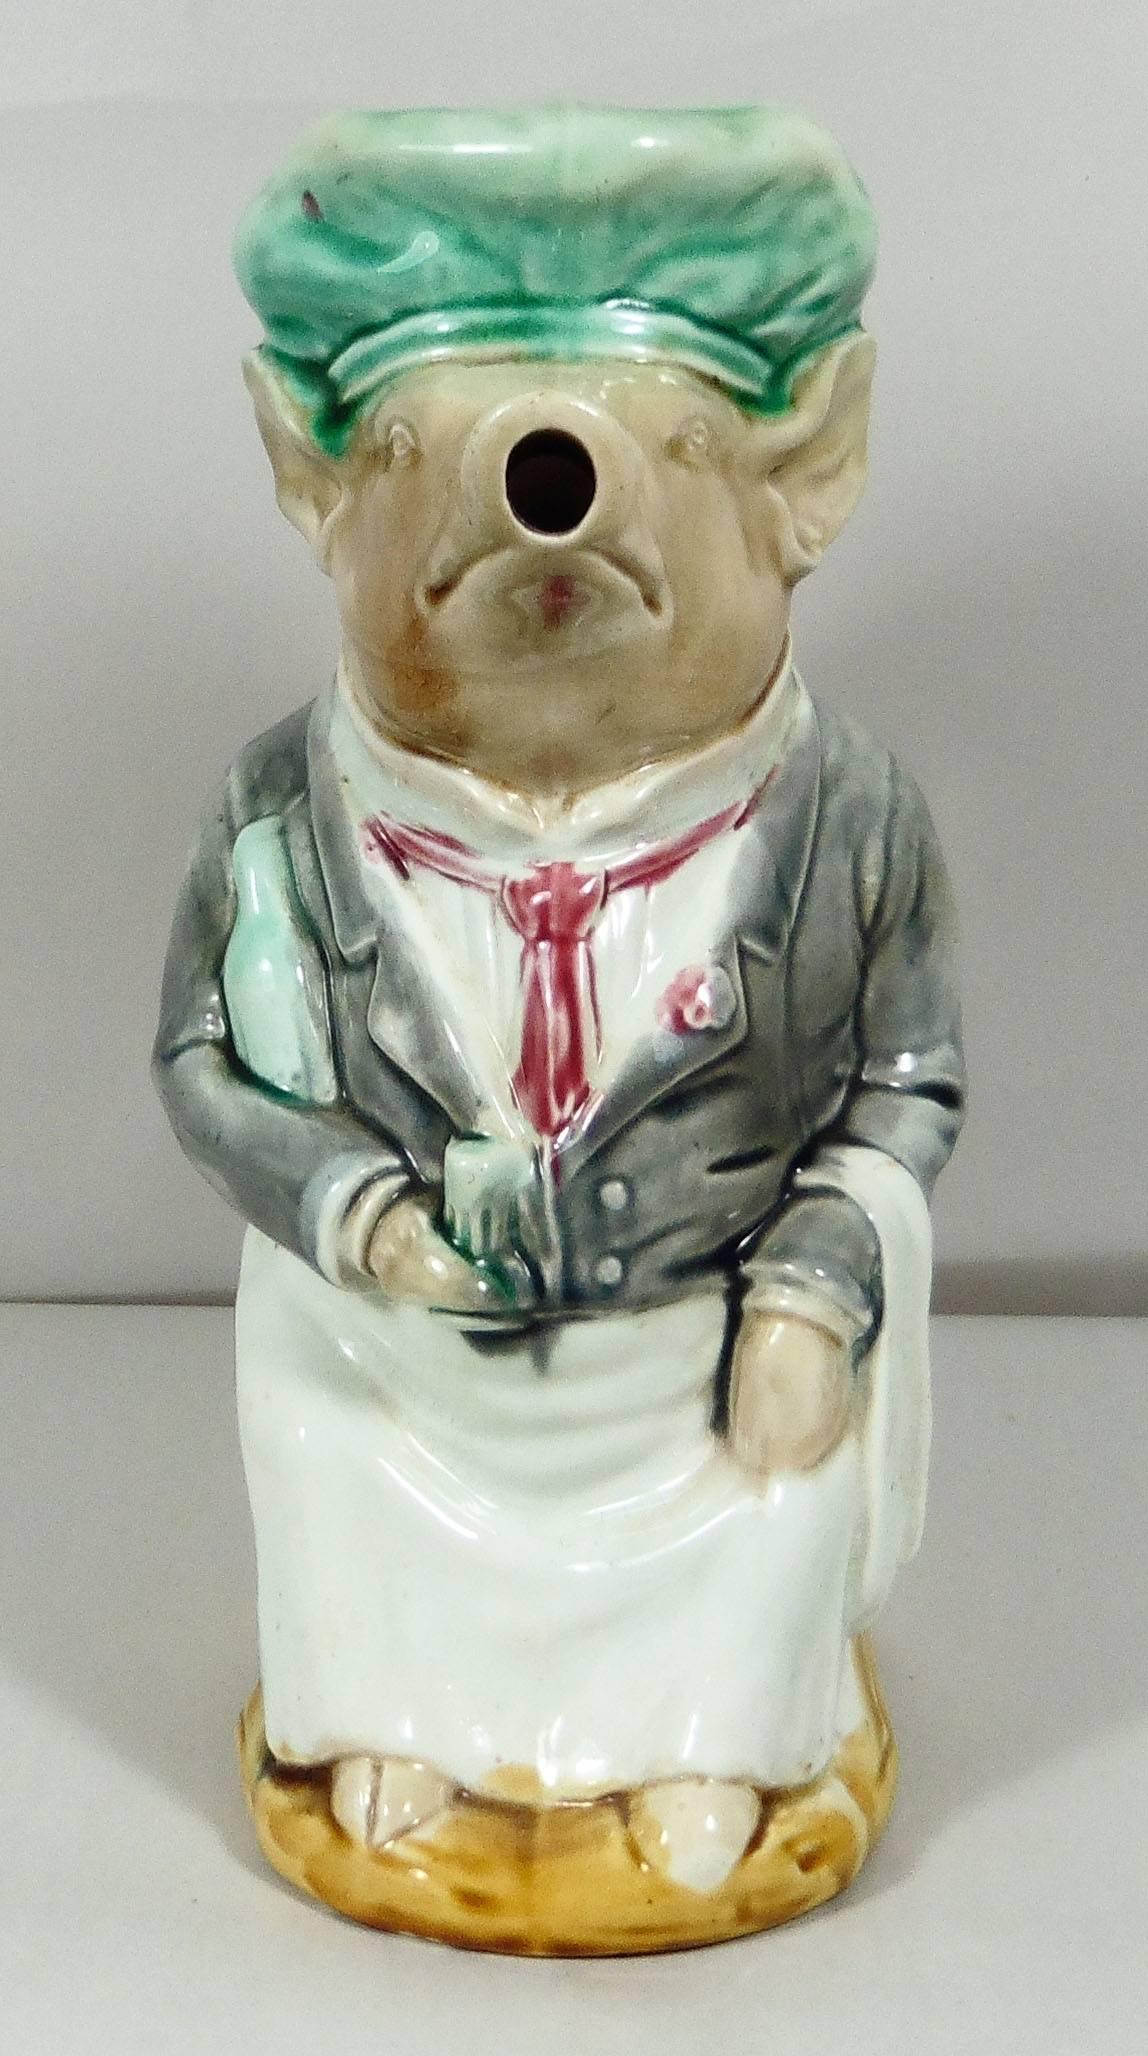 French Majolica Pig dressed as a waiter signed Onnaing, circa 1900.
Reference / 